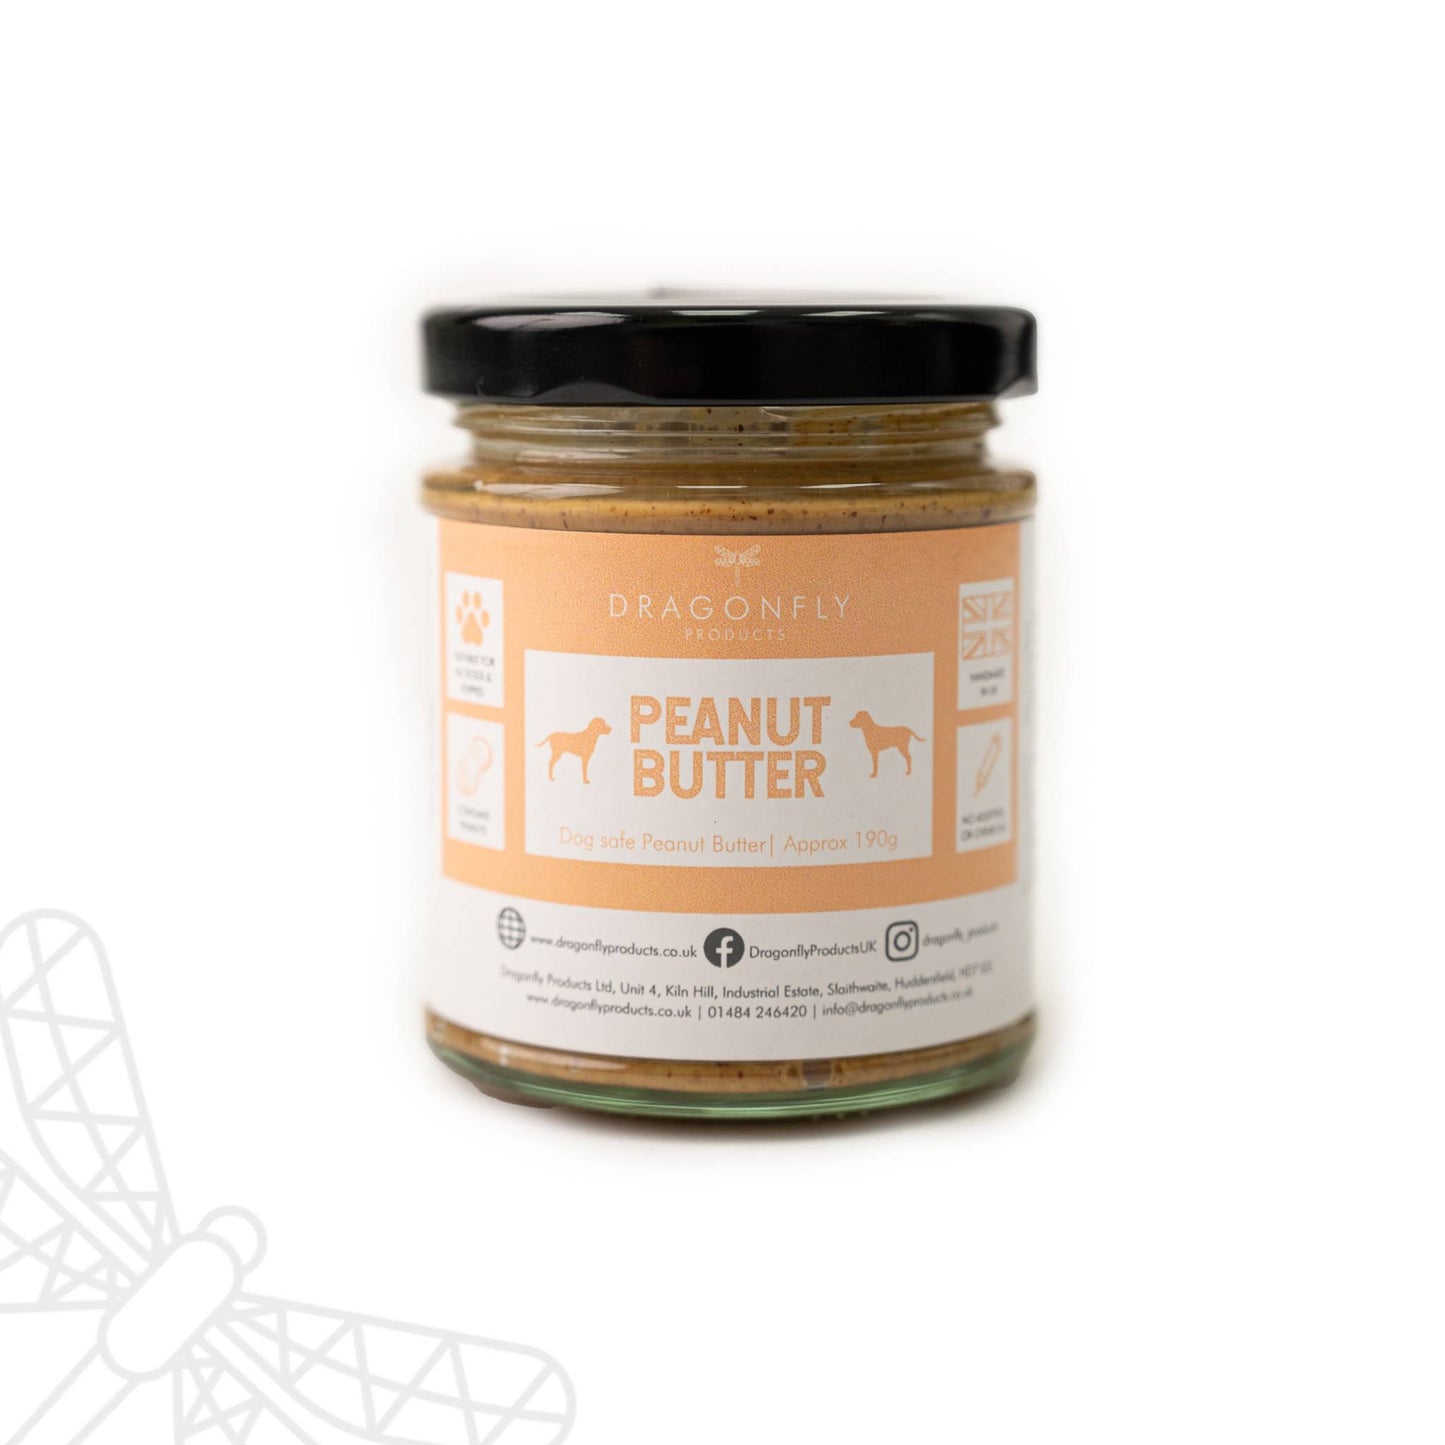 Peanut butter for dogs safe